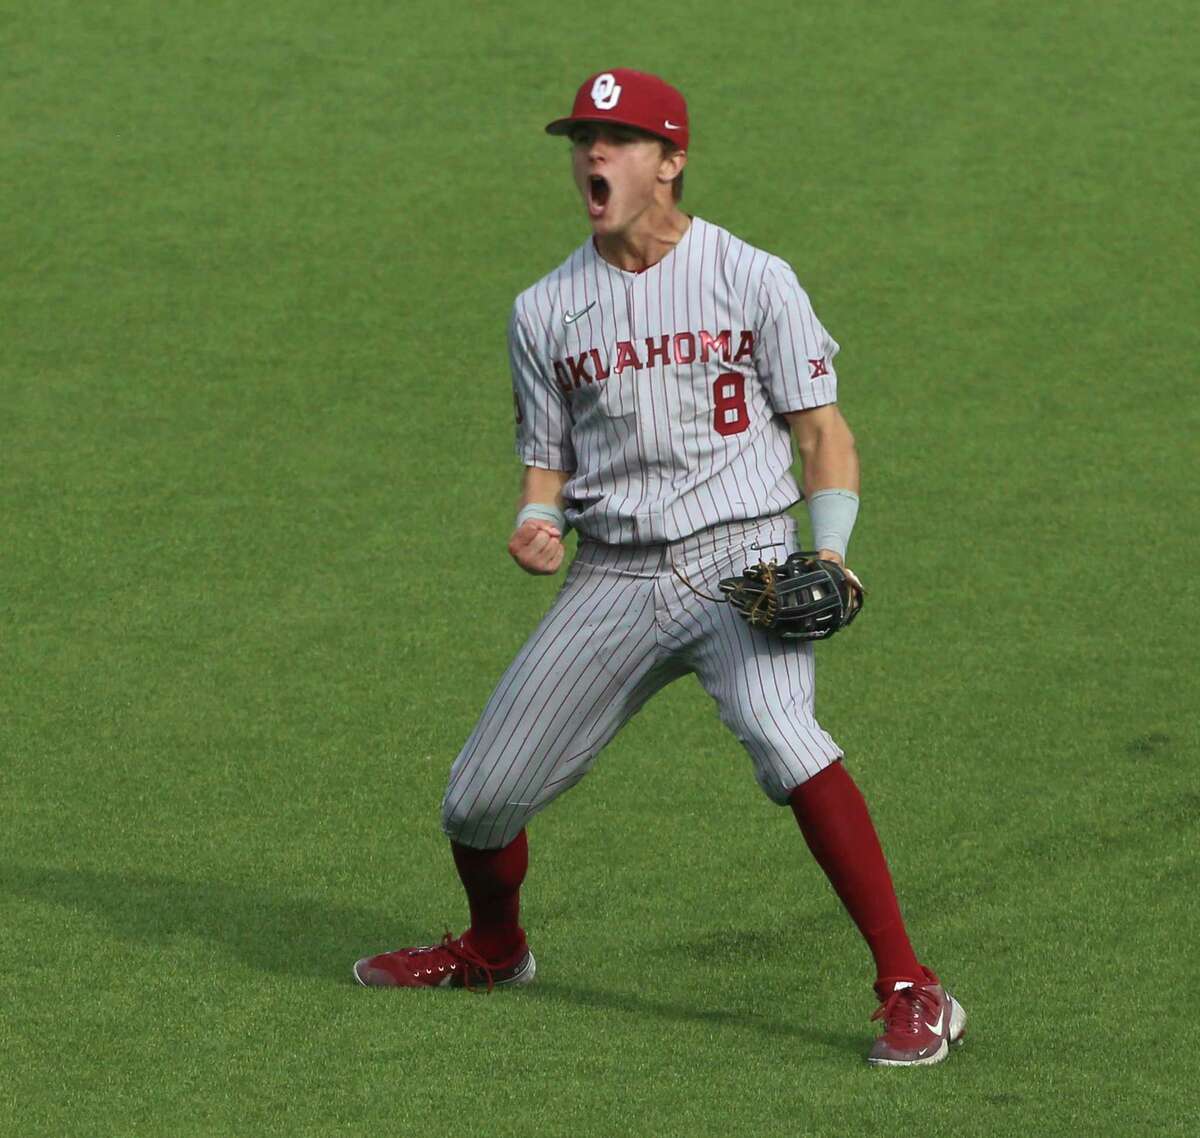 Oklahoma's John Spikerman (8) celebrates after catching a fly ball in right field for the final out against Virginia Tech in an NCAA college baseball super regional game in Blacksburg, Va., Friday, June 10, 2022. (AP Photo/Matt Gentry)